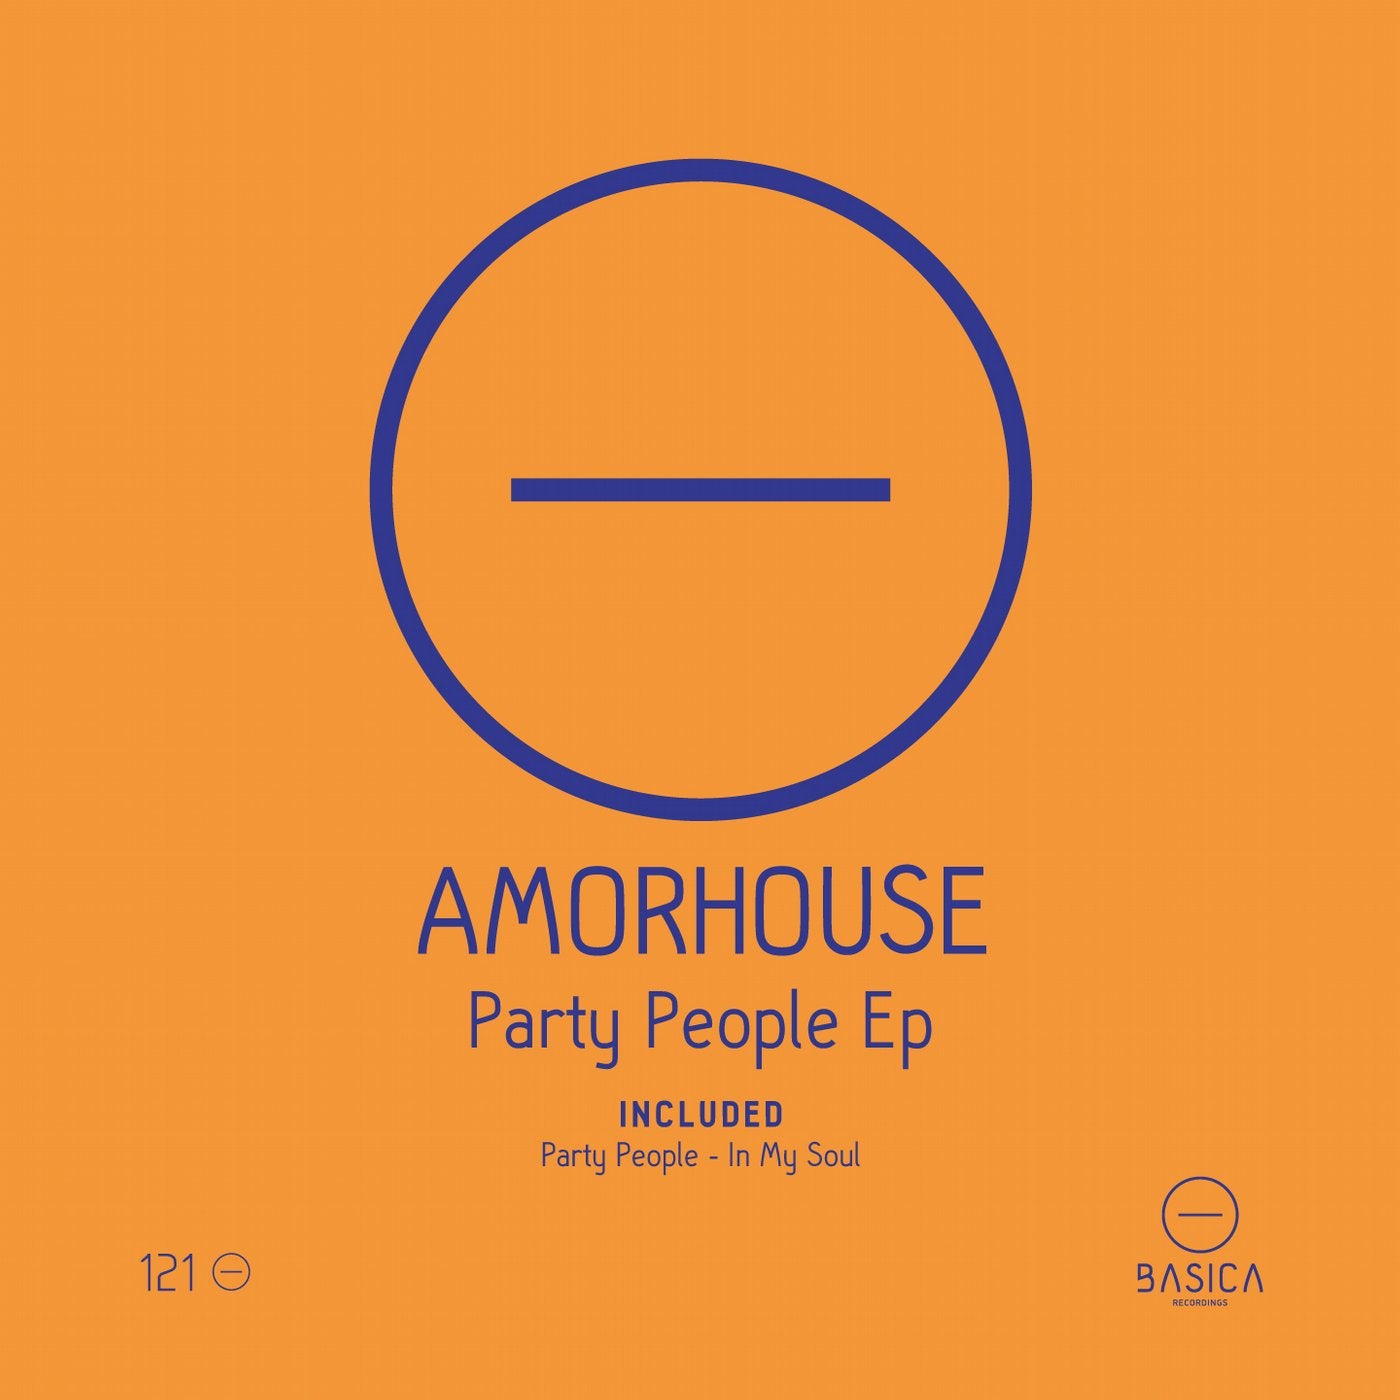 Party People Ep